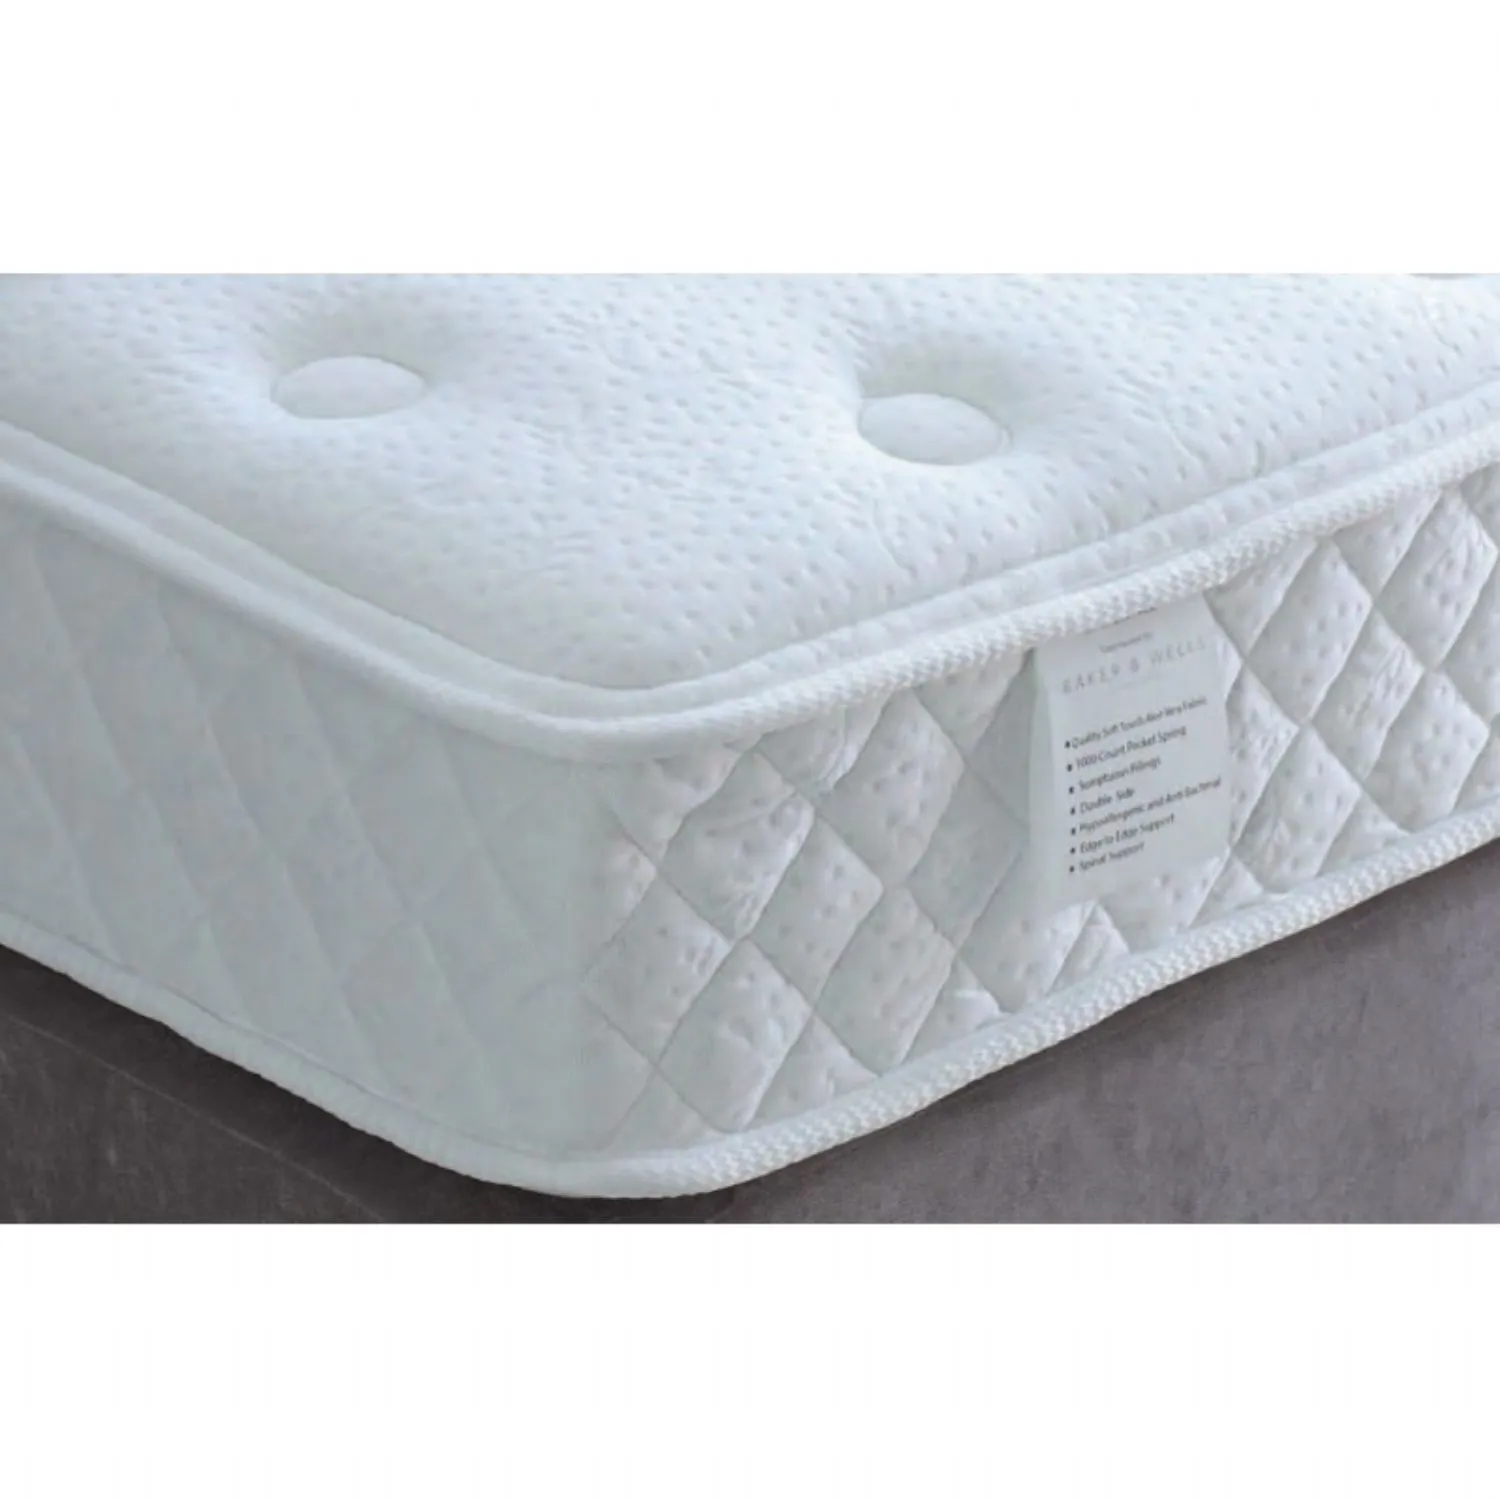 Box Rolled Mattress Excellence 1000 Pocket Spring